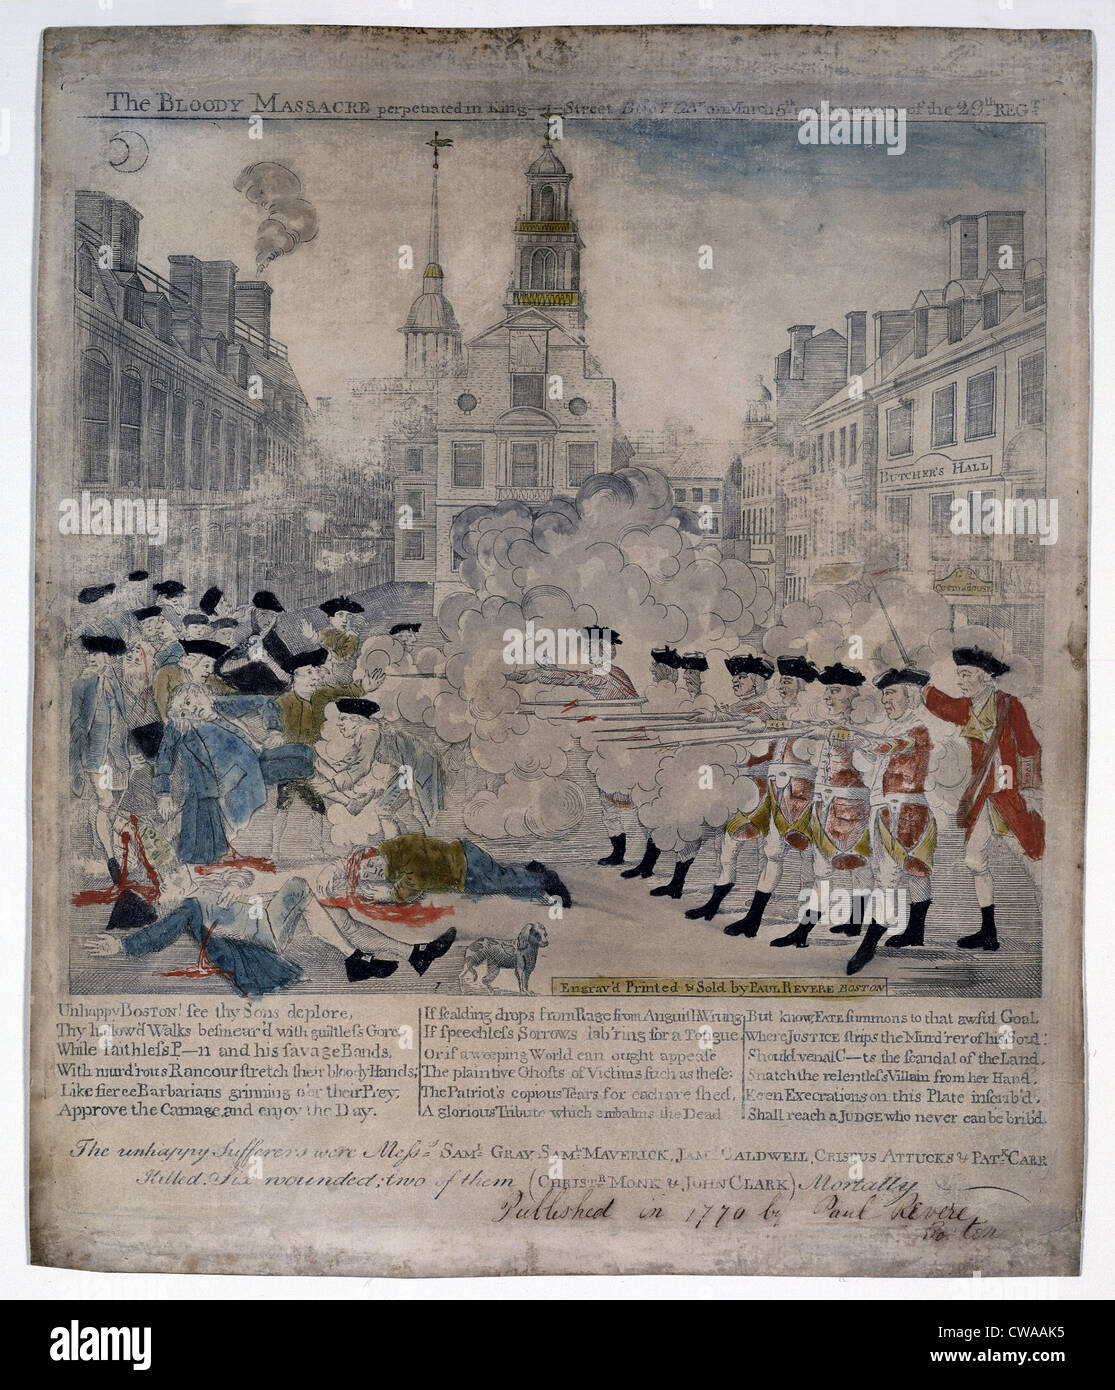 Boston Massacre.  British troops shoot into and a crowd in Boston, Mass. on March 5, 1770, killing five civilians including, Stock Photo